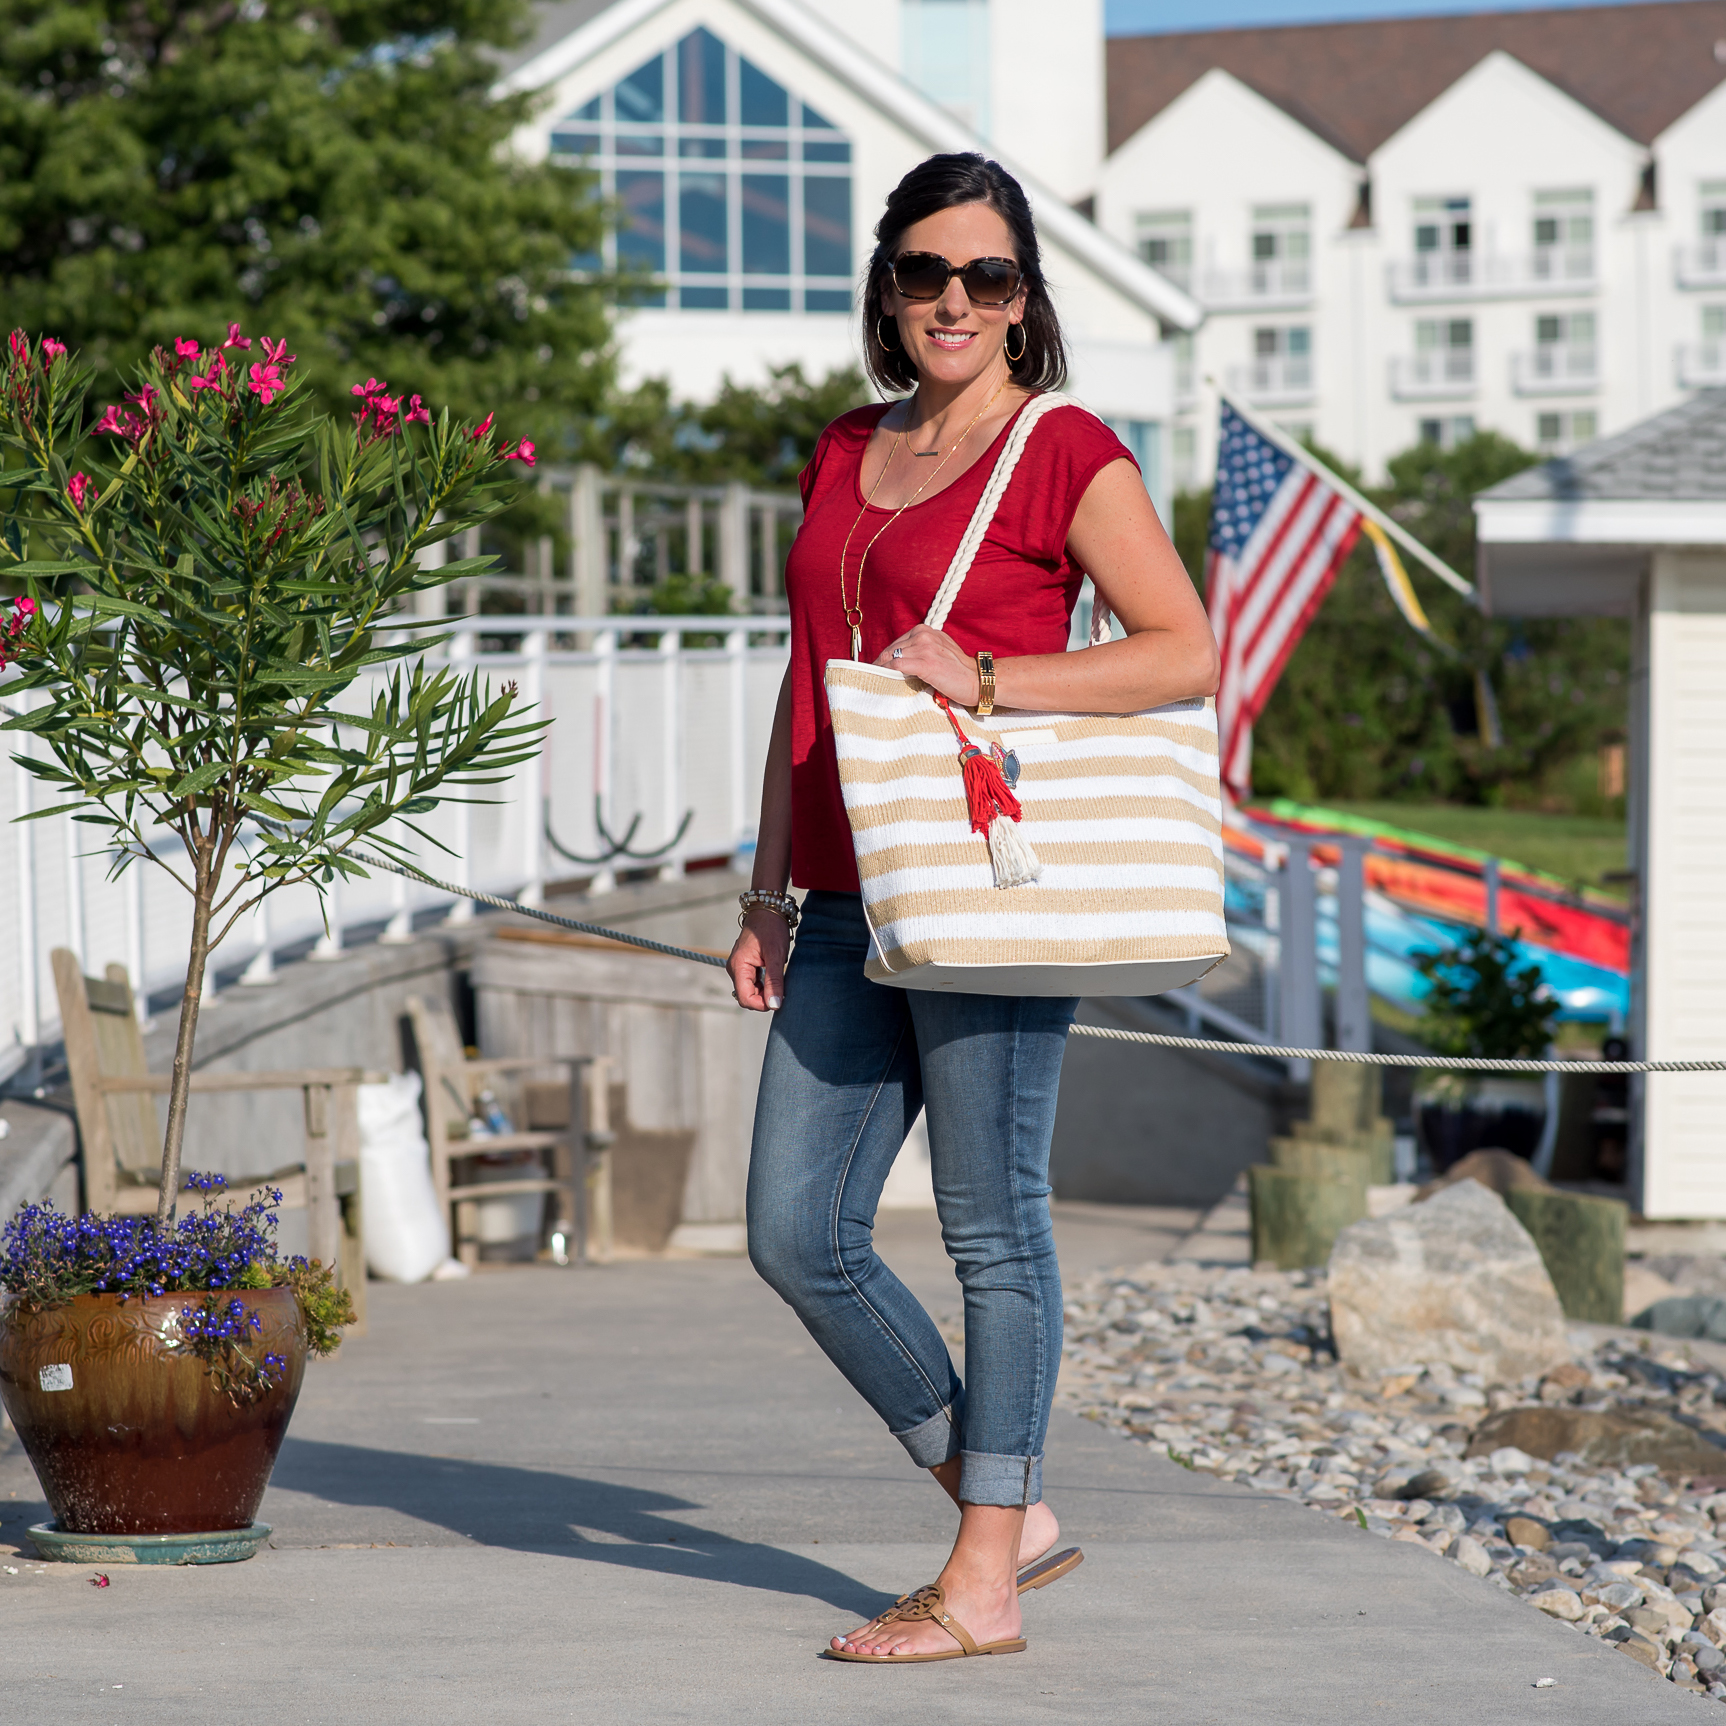 This casual 4th of July outfit for women over 40 is festive but tasteful. You can easily adapt this July 4th outfit idea with what you have in your closet!